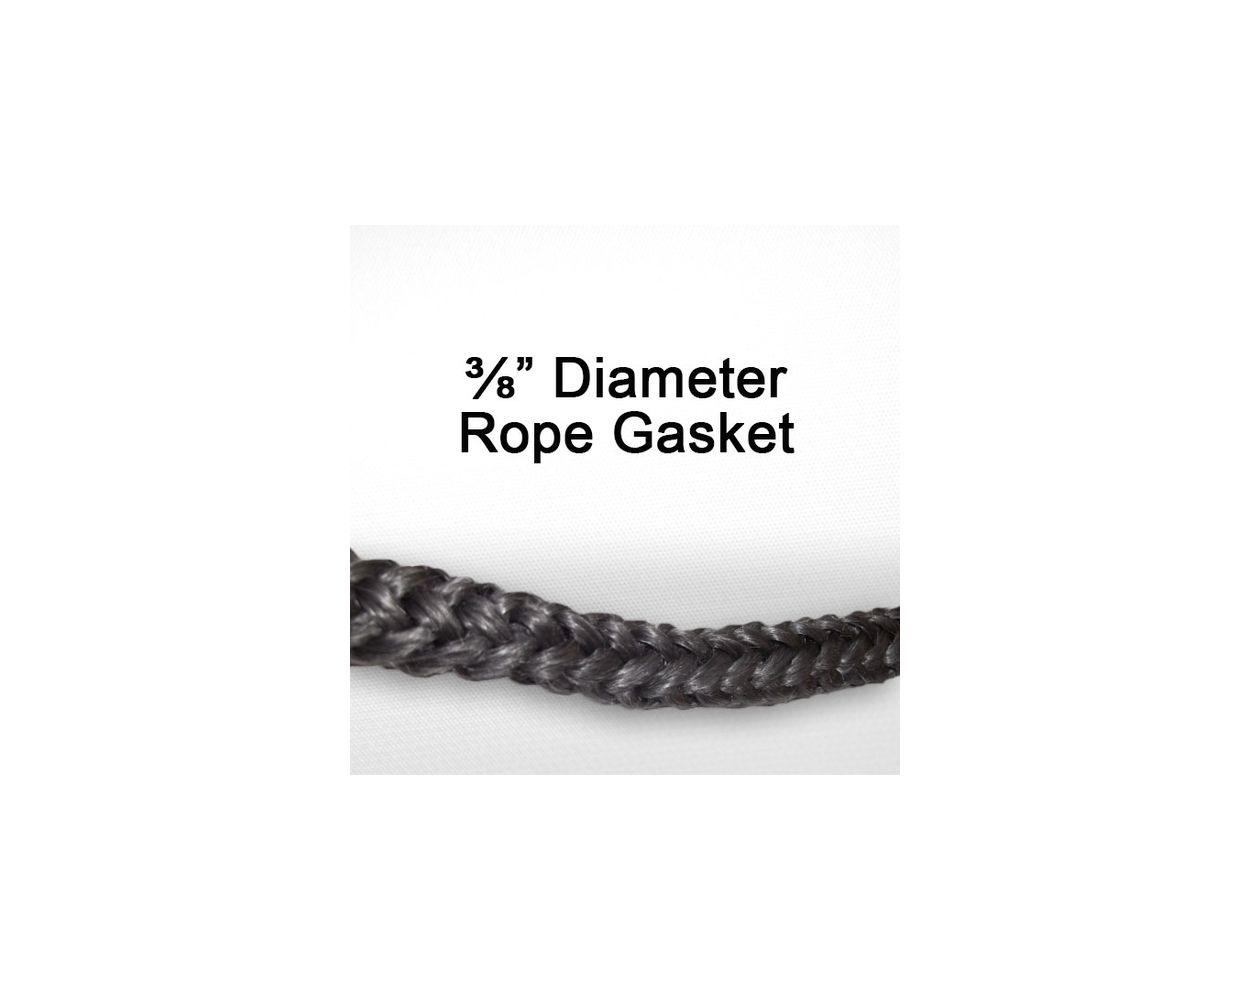 Jotul Wood Stove Door gasket kit - 7ft (3/8in) gasket and cement tube - Woodstove Fireplace Glass